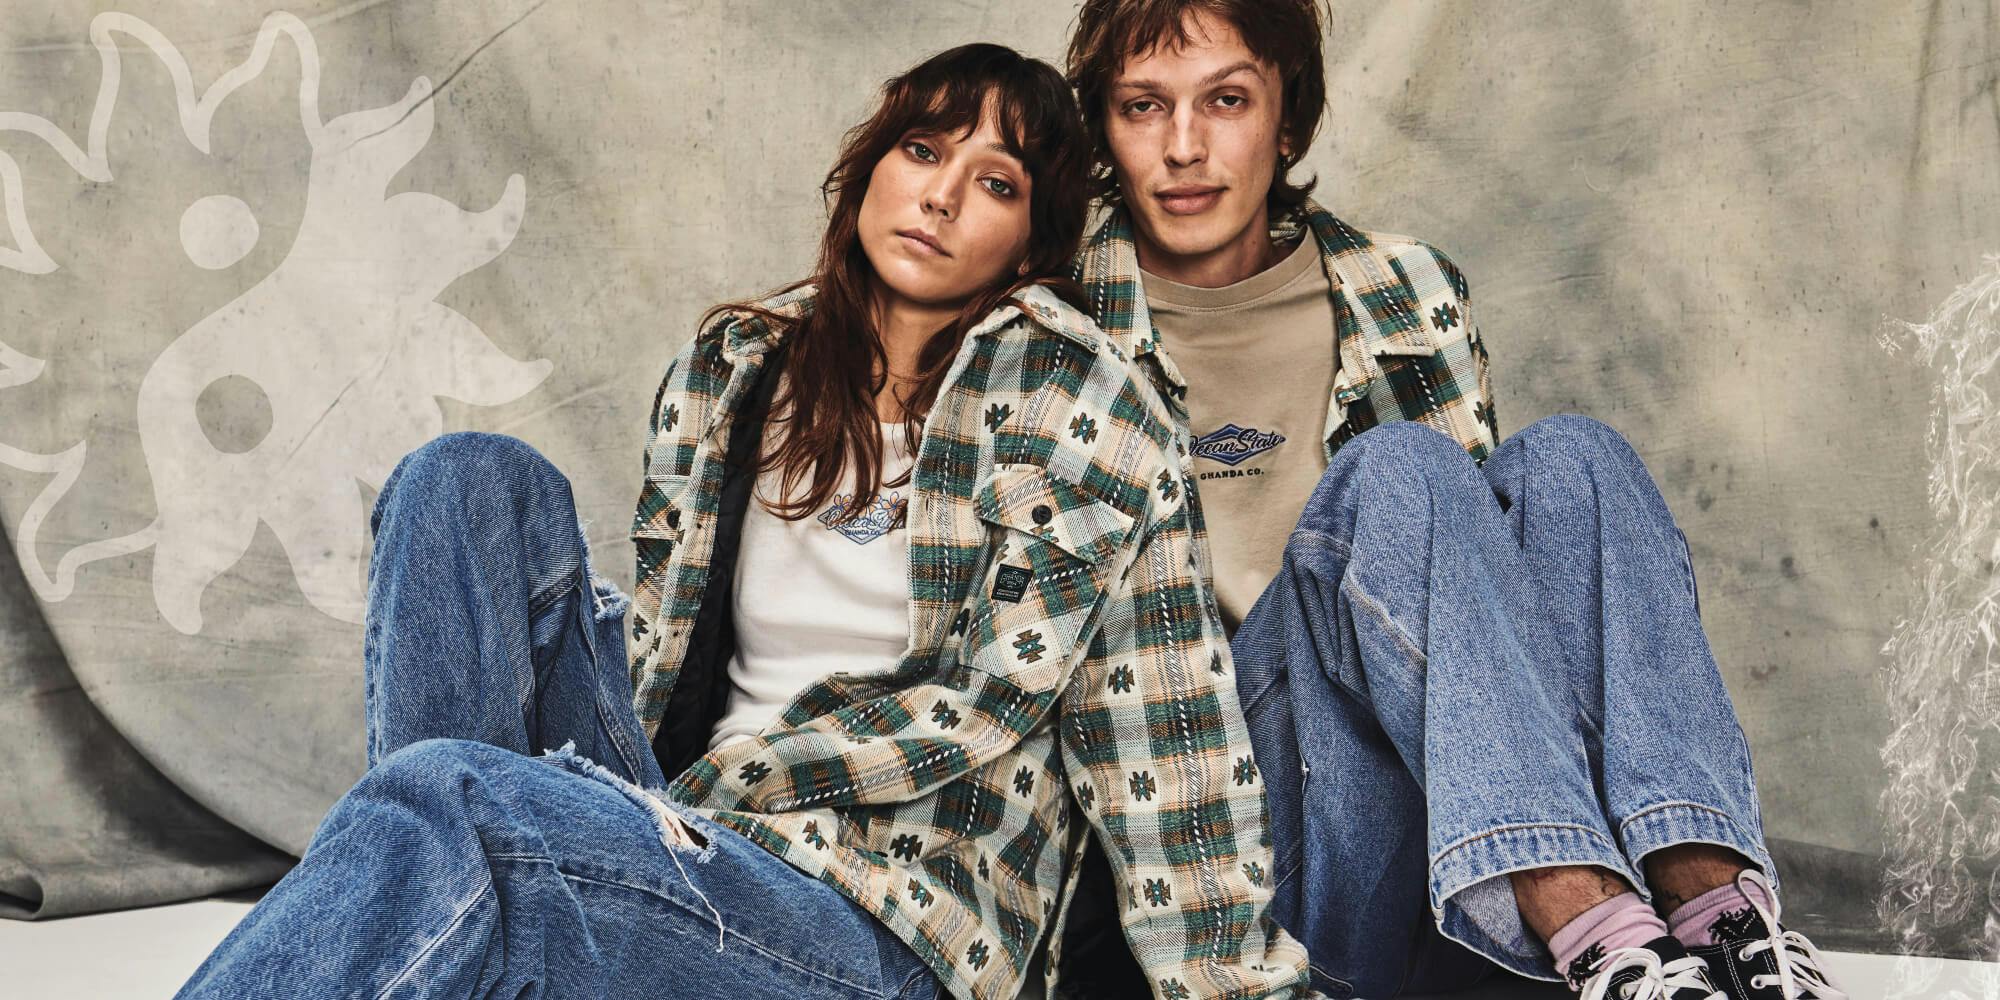 Image of female and male model both wearing denim jeans and a checked jacket, they're sitting in front of a light wash denim background.